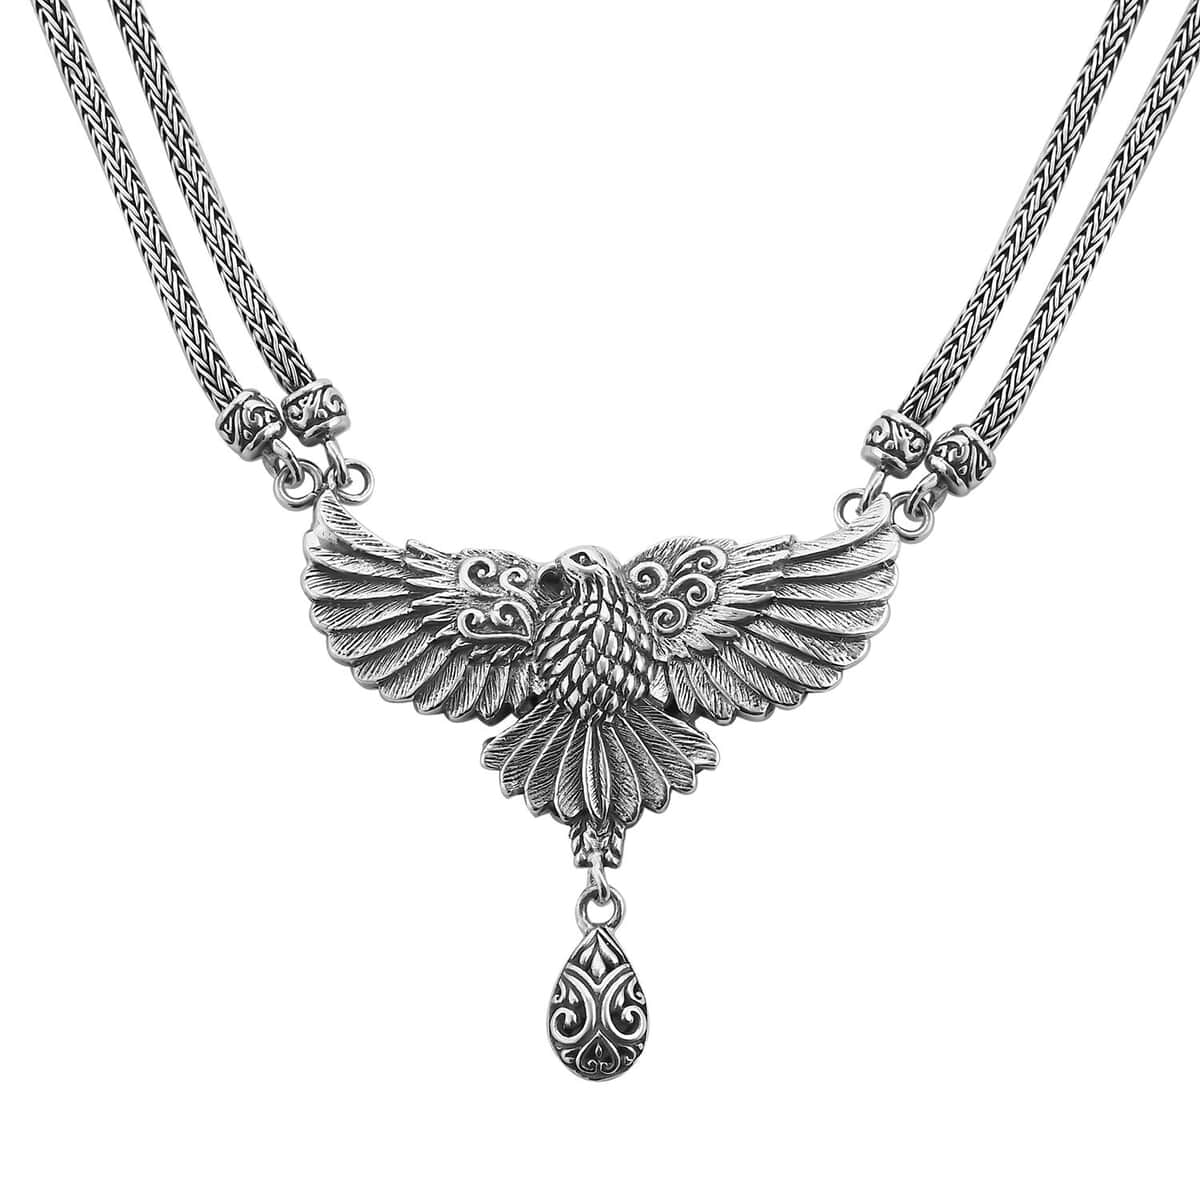 Bali Legacy Sterling Silver Garuda Necklace 20 Inches 40.70 Grams image number 4